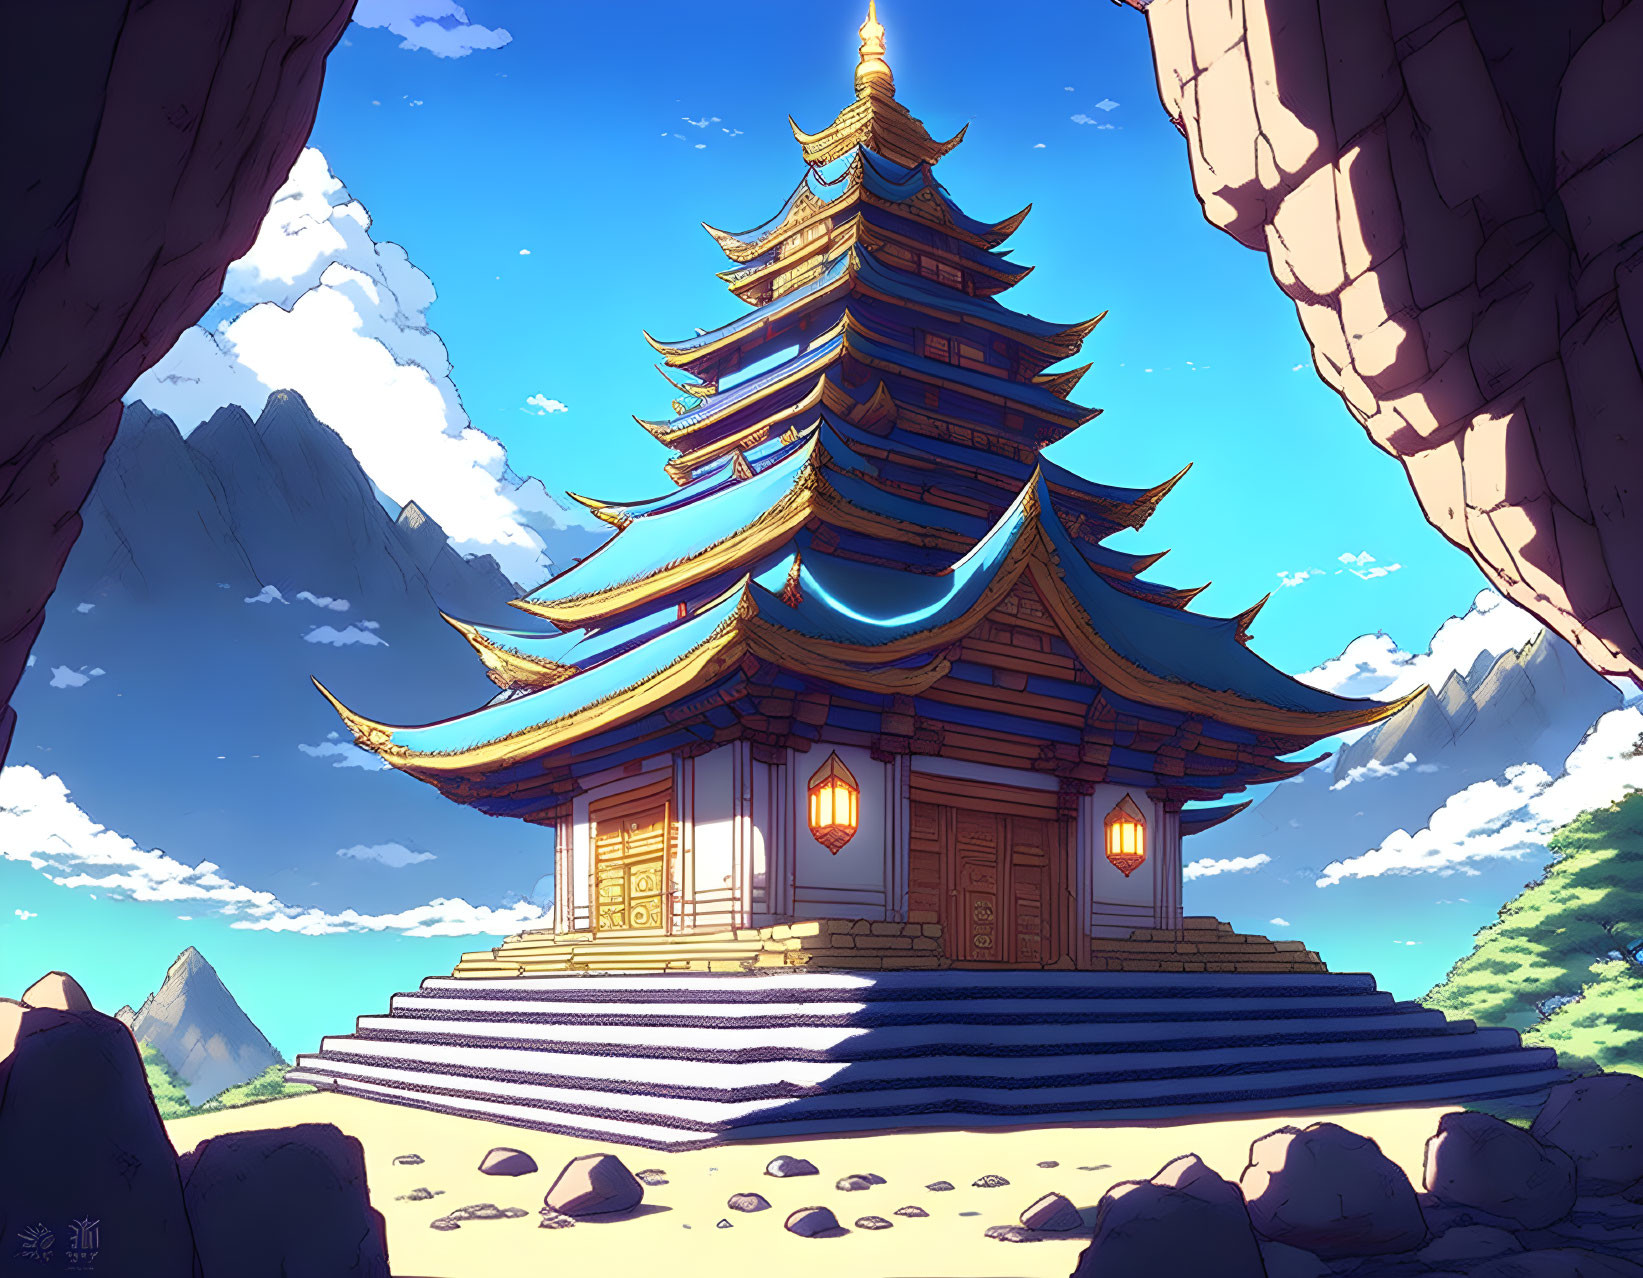 Temple on top of a mountain